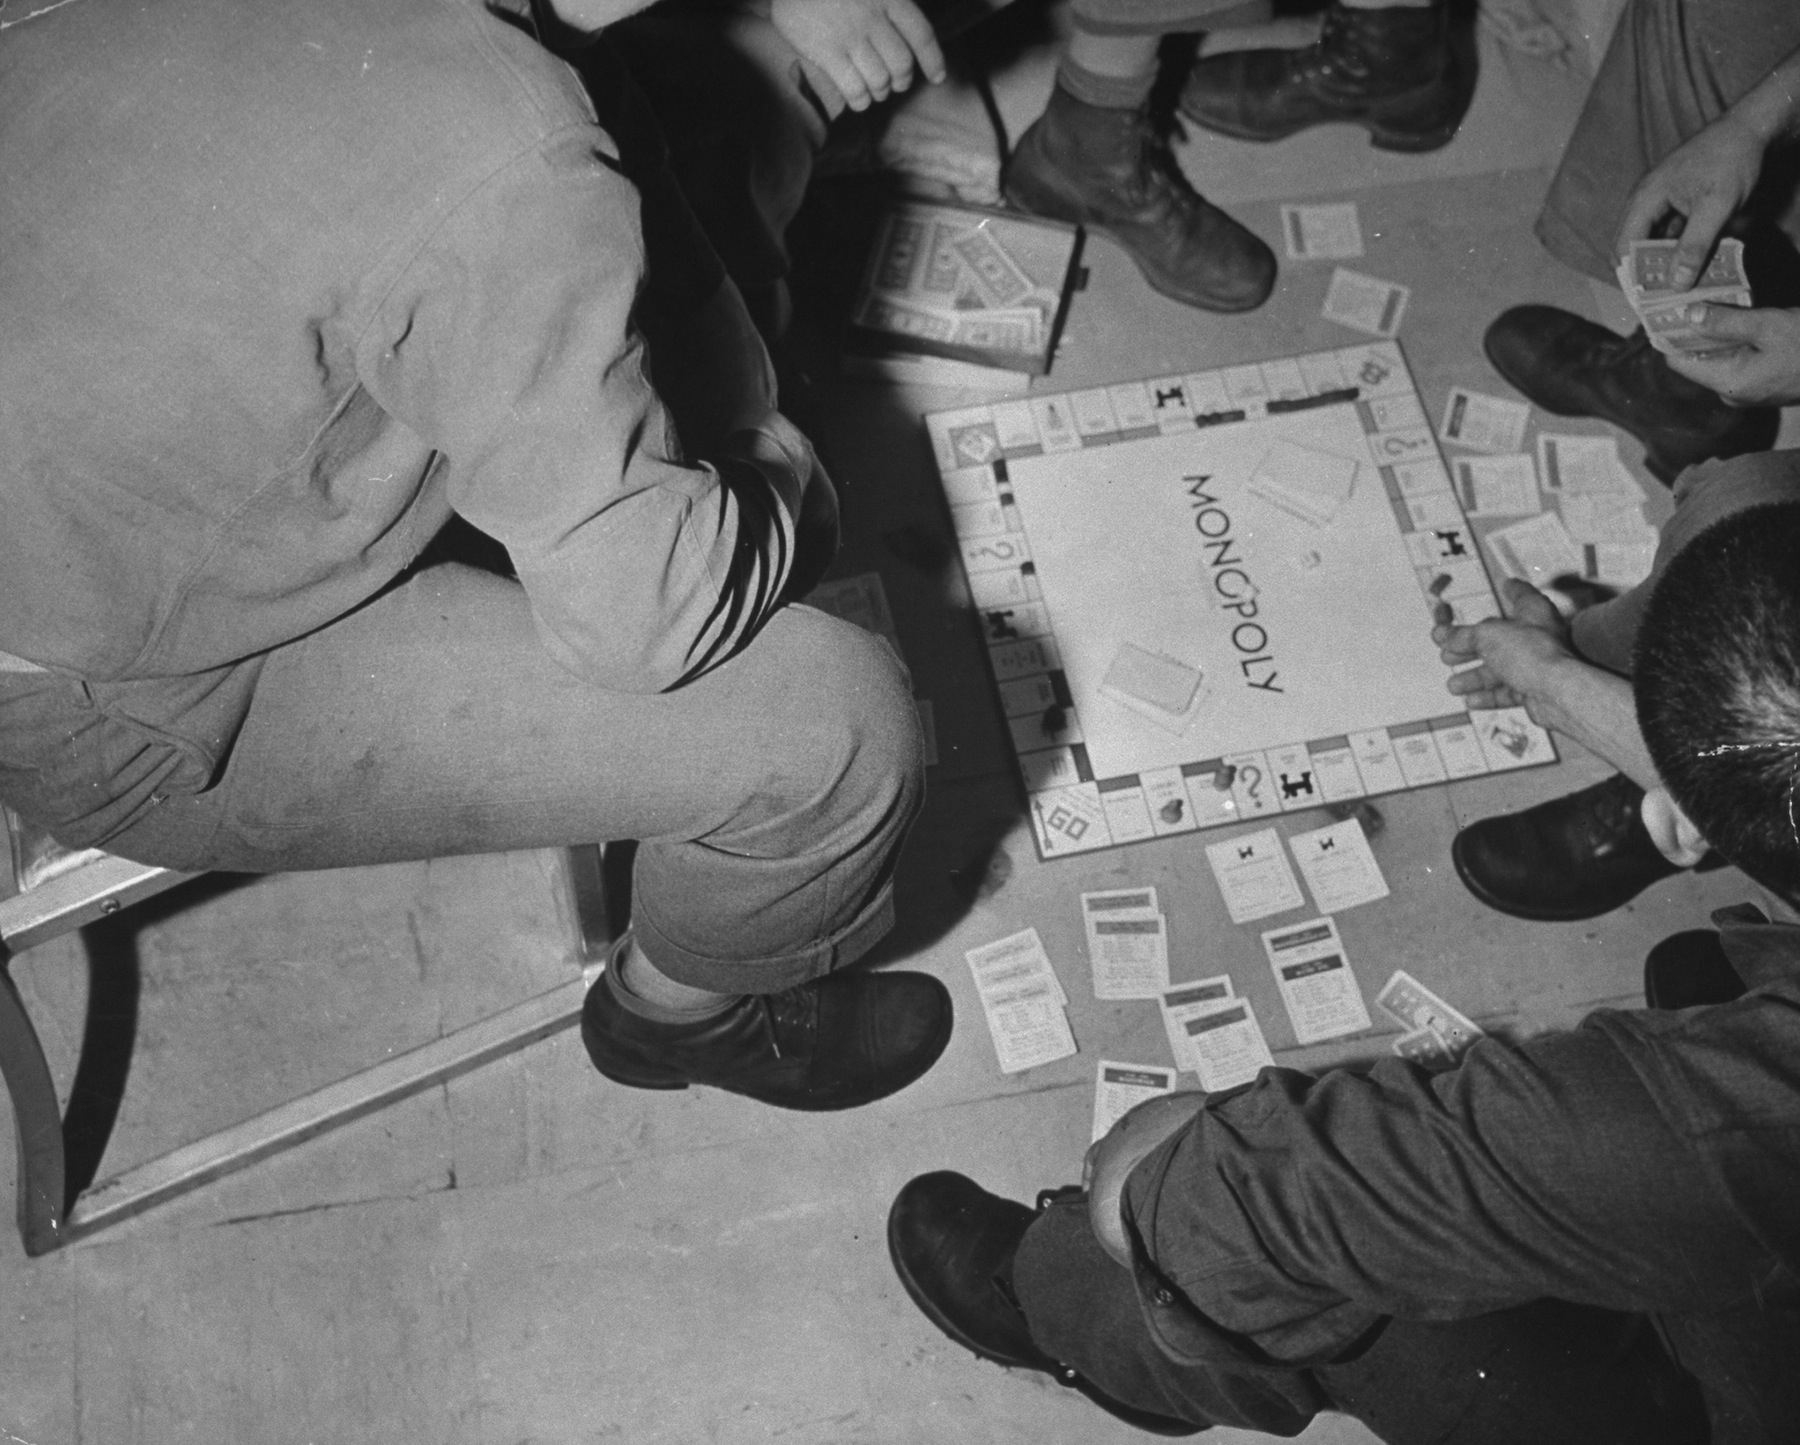 US troops on a transport to Australia playing Monopoly, in 1942 (Wallace Kirkland—The LIFE Picture Collection/Getty Images)